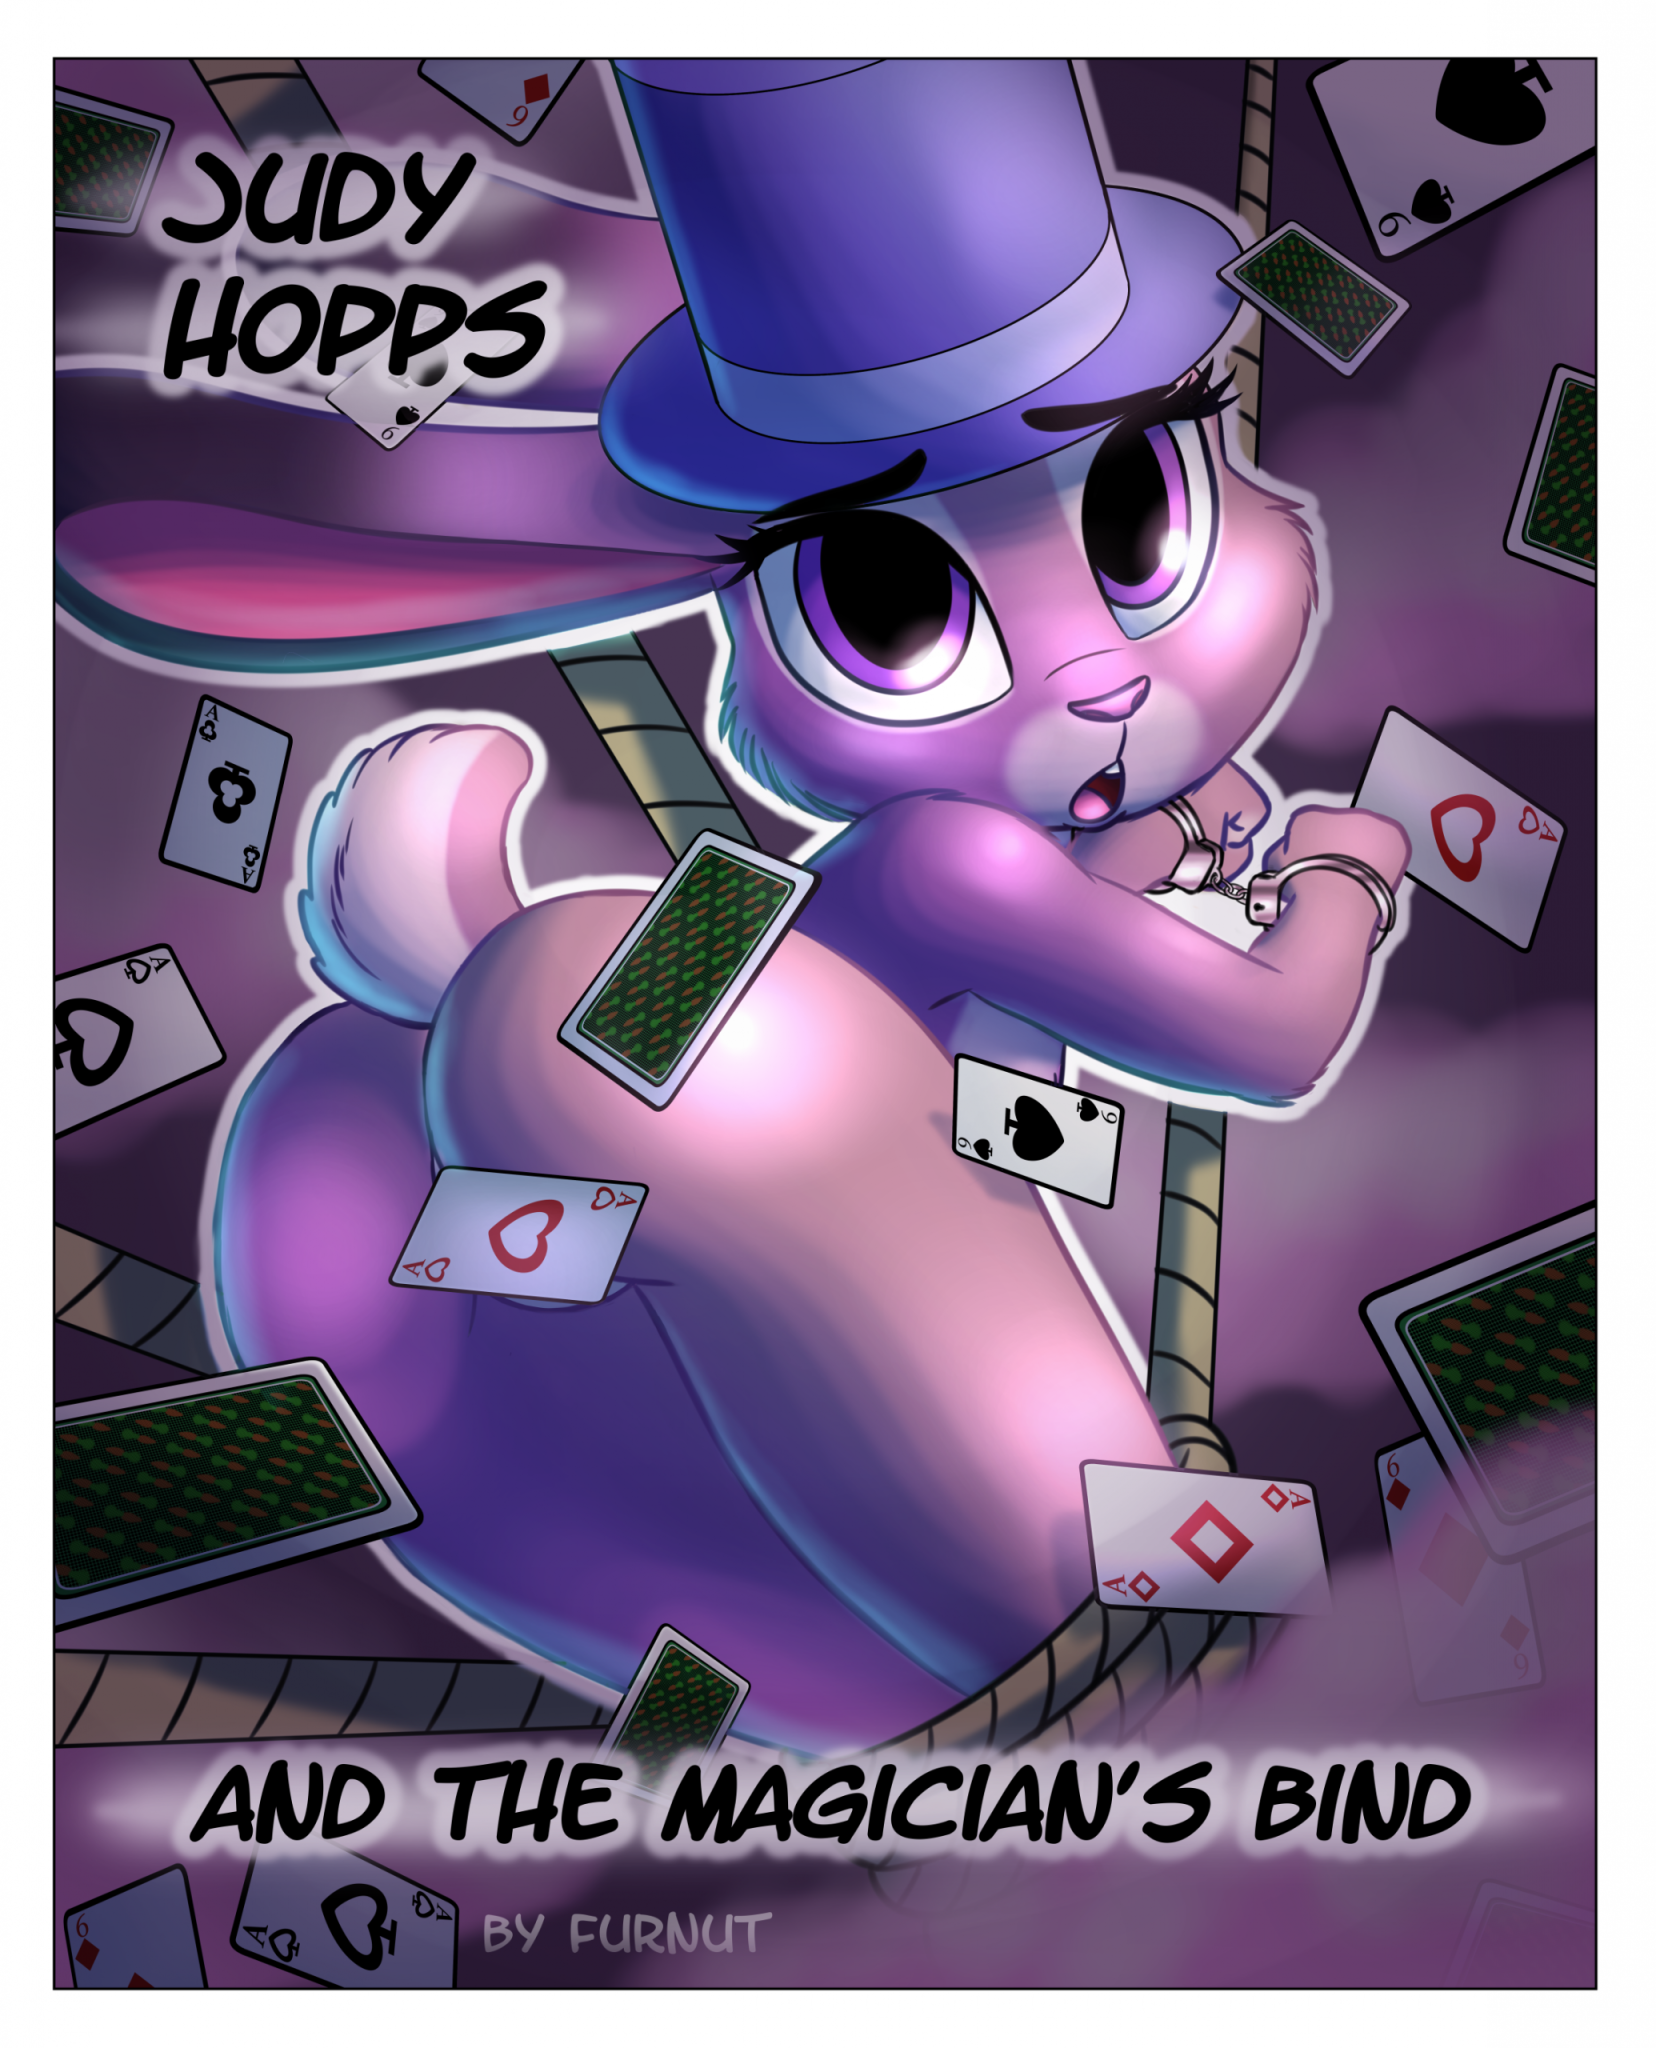 Judy Hopps and the Magician’s Bind